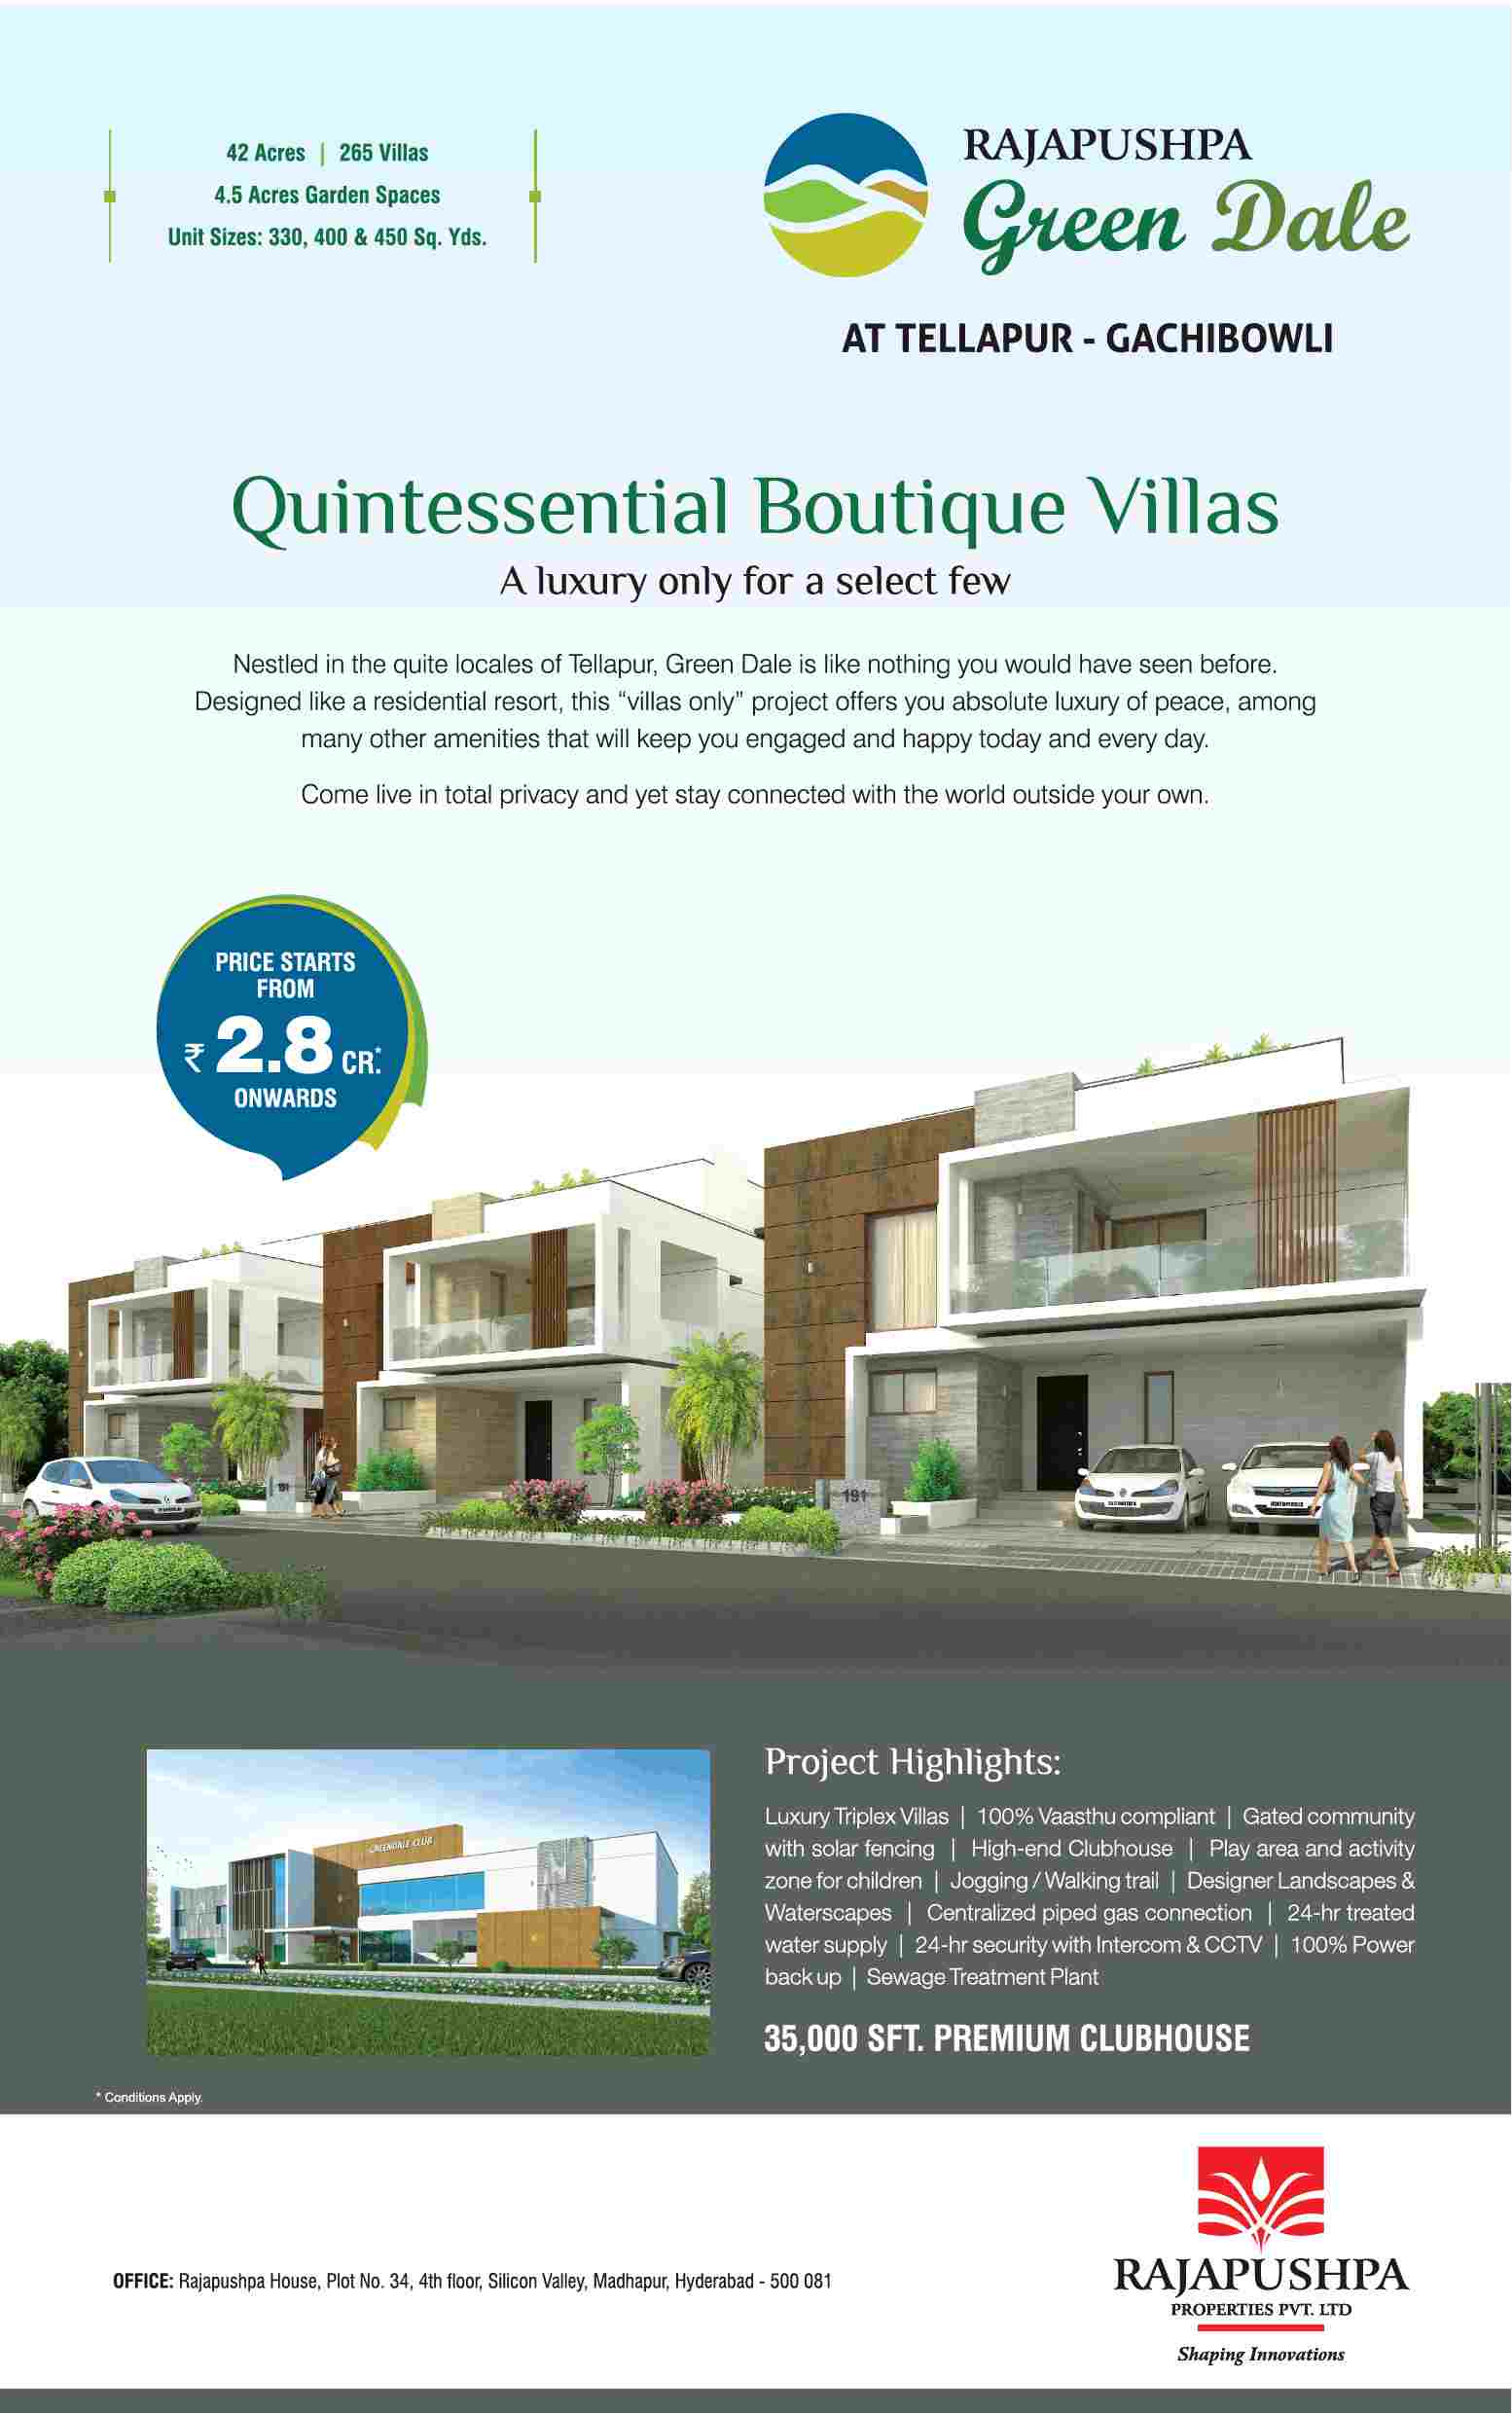 Reside in quintessential boutique villas at Rajapushpa Green dale in Hyderabad Update